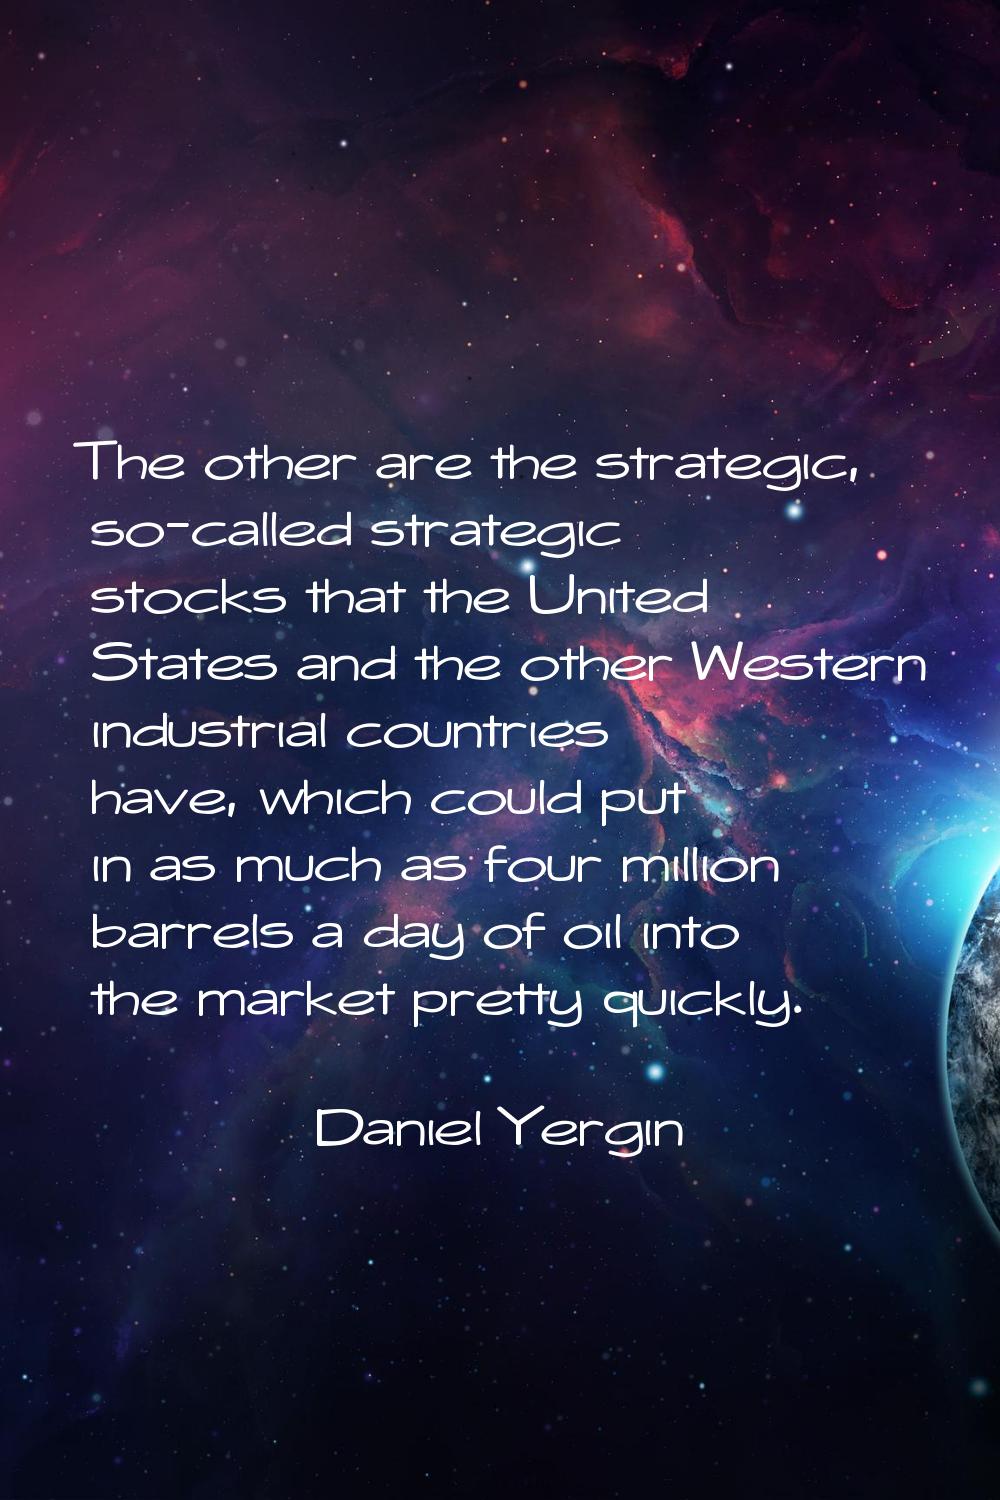 The other are the strategic, so-called strategic stocks that the United States and the other Wester